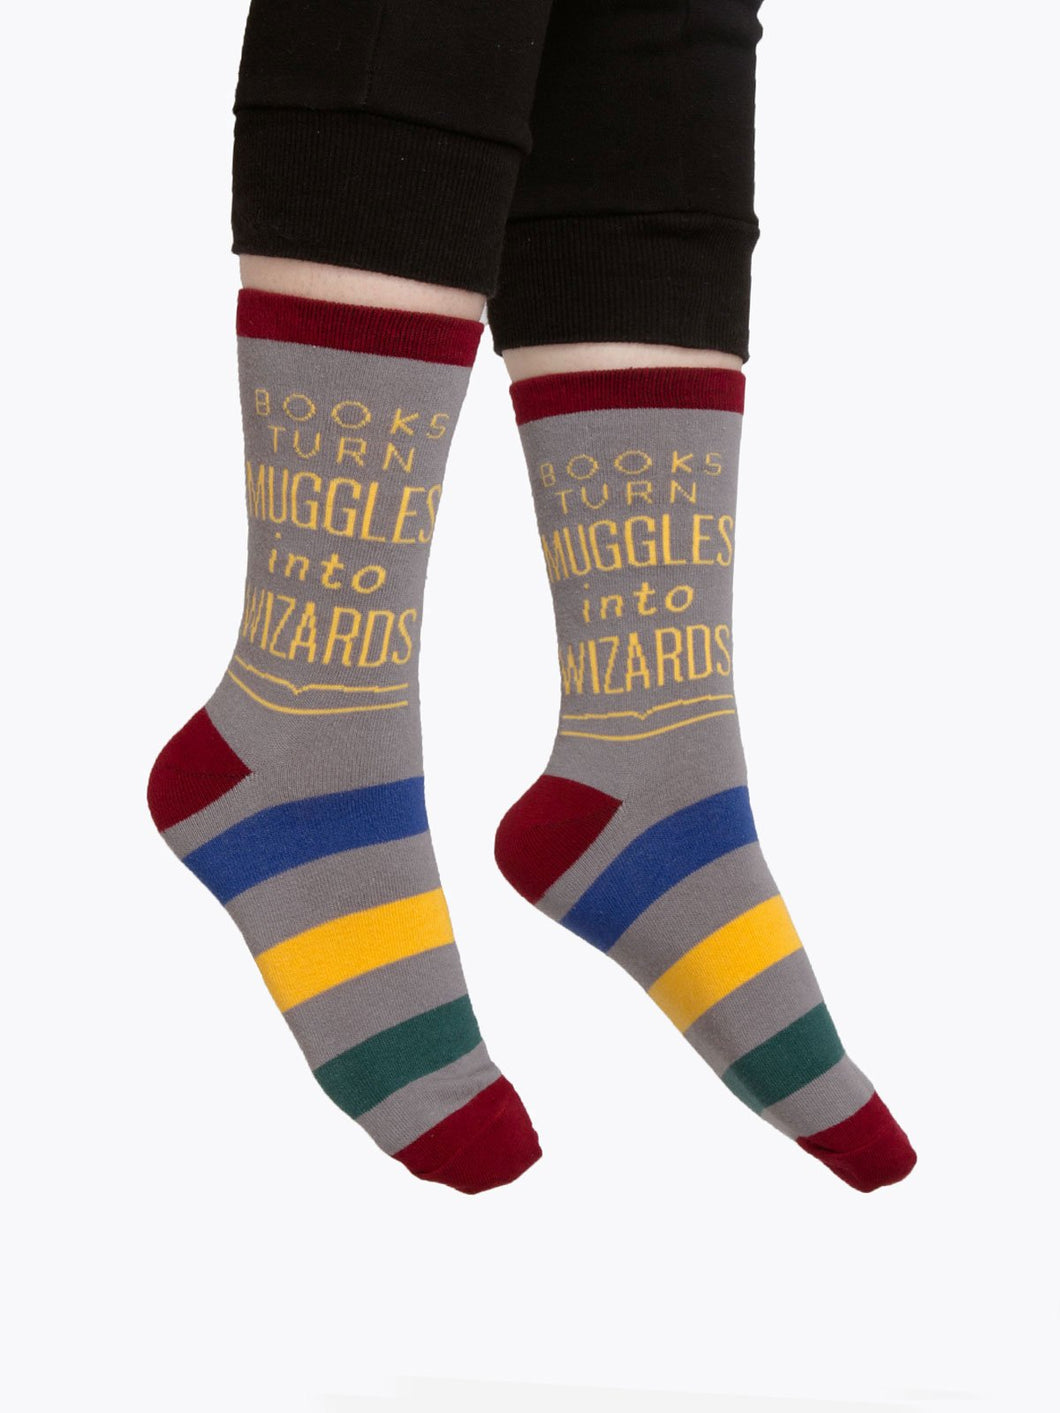 Books Turn Muggles into Wizards Socks (Adult)